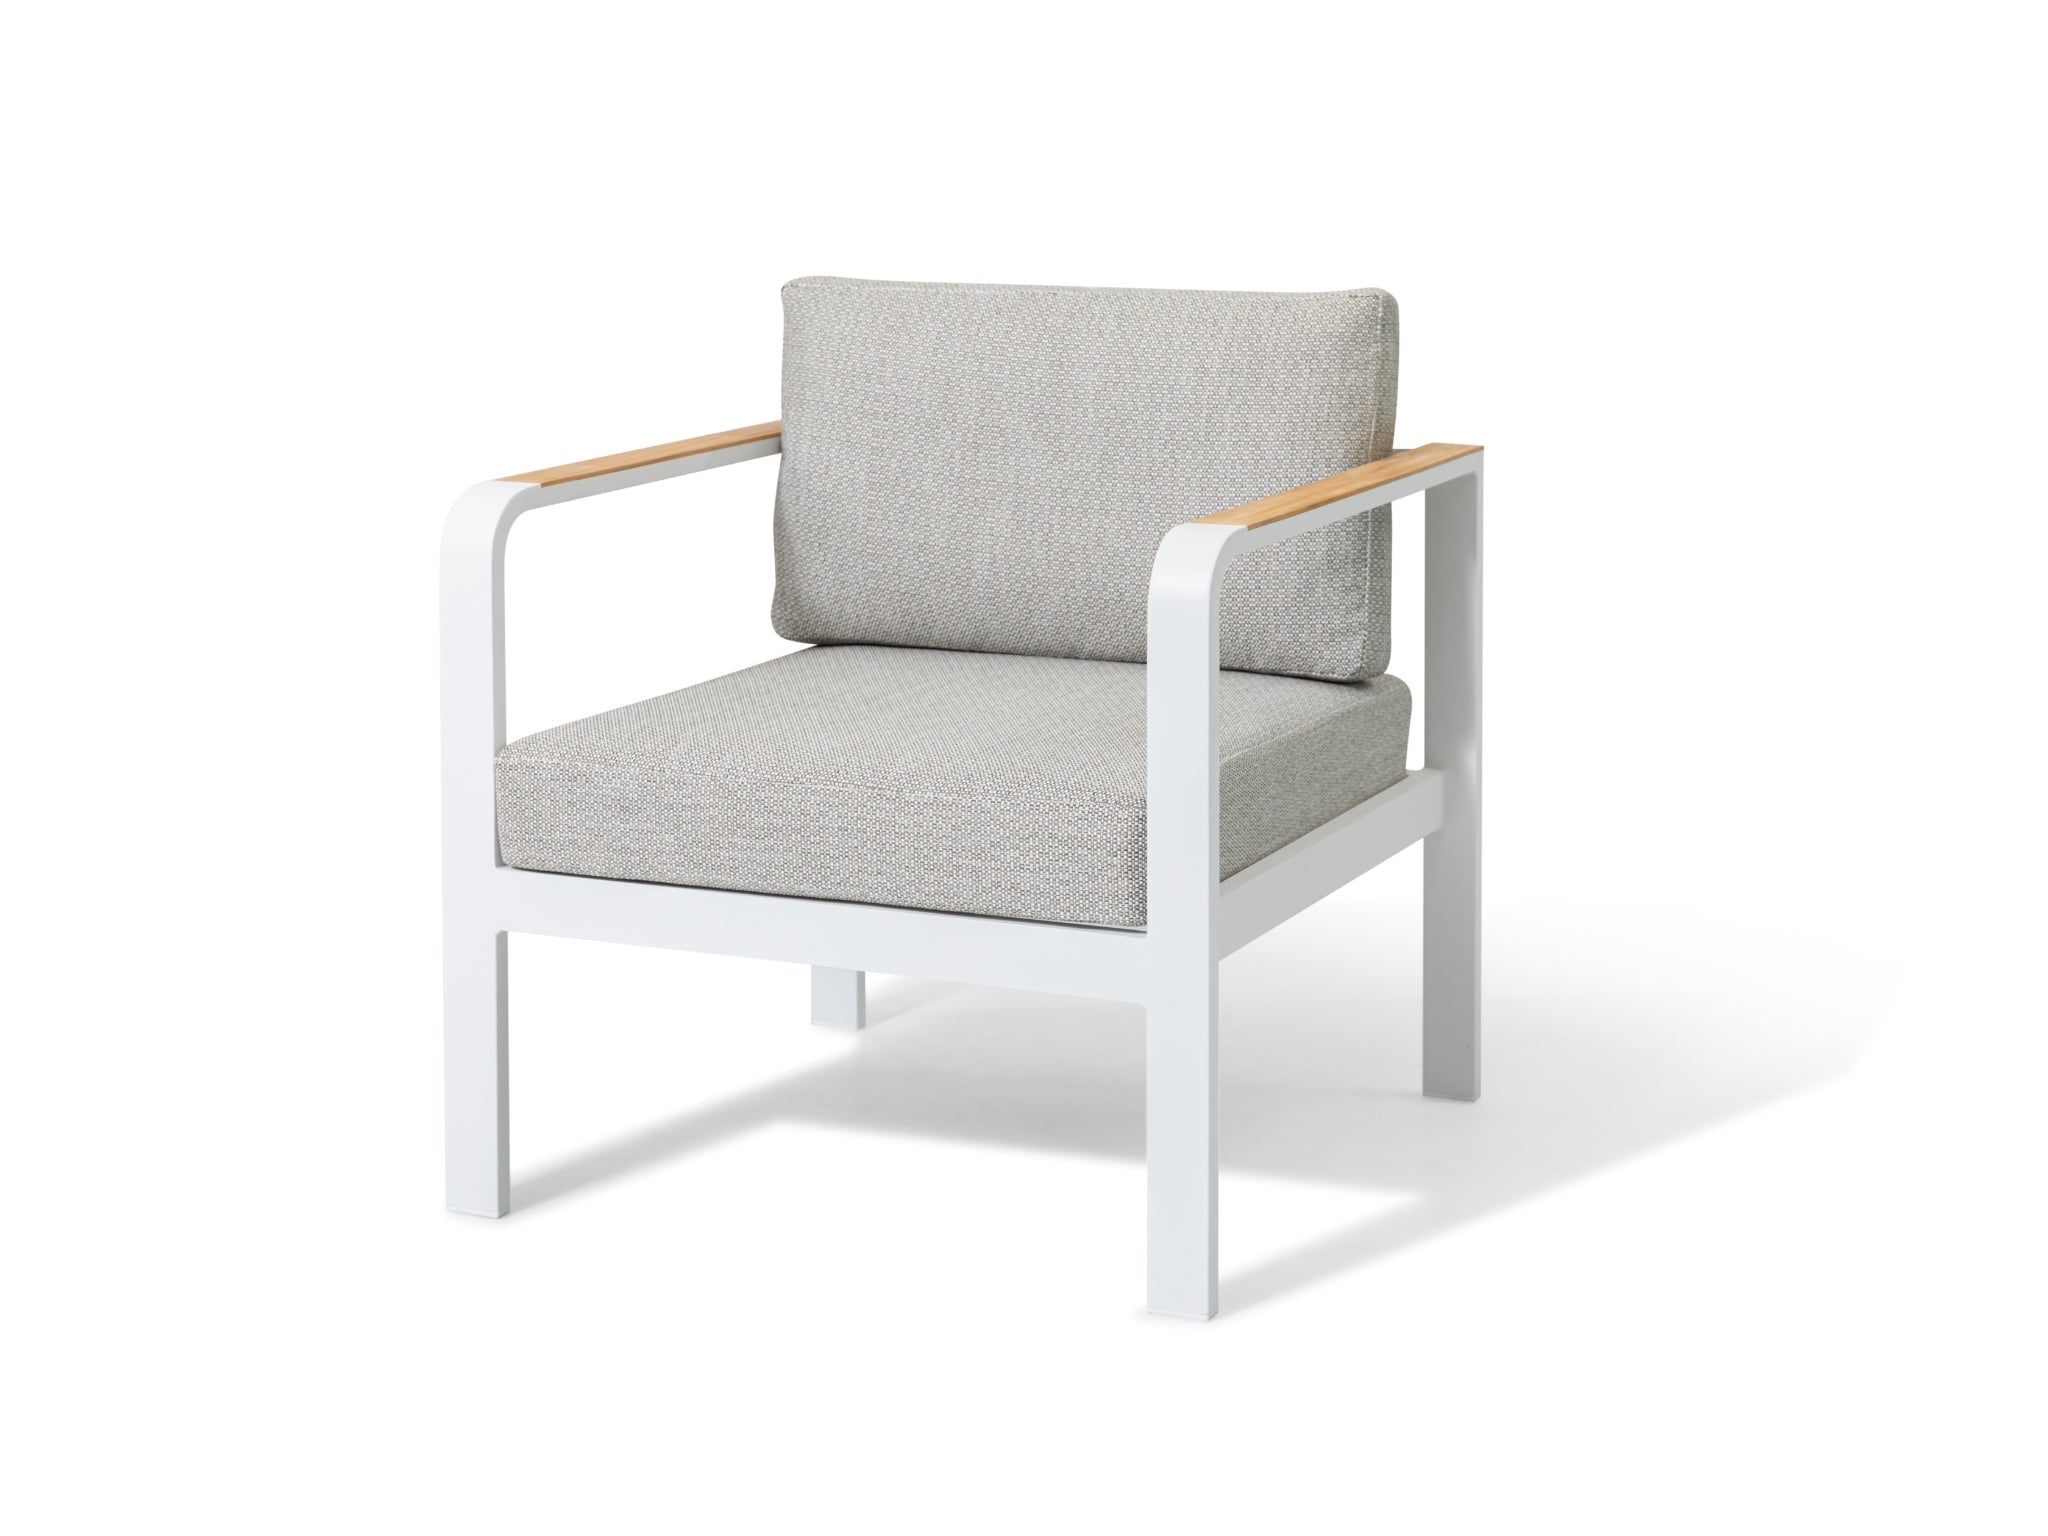 SIMPO by Sunlongarden Aegean Lounge Chair